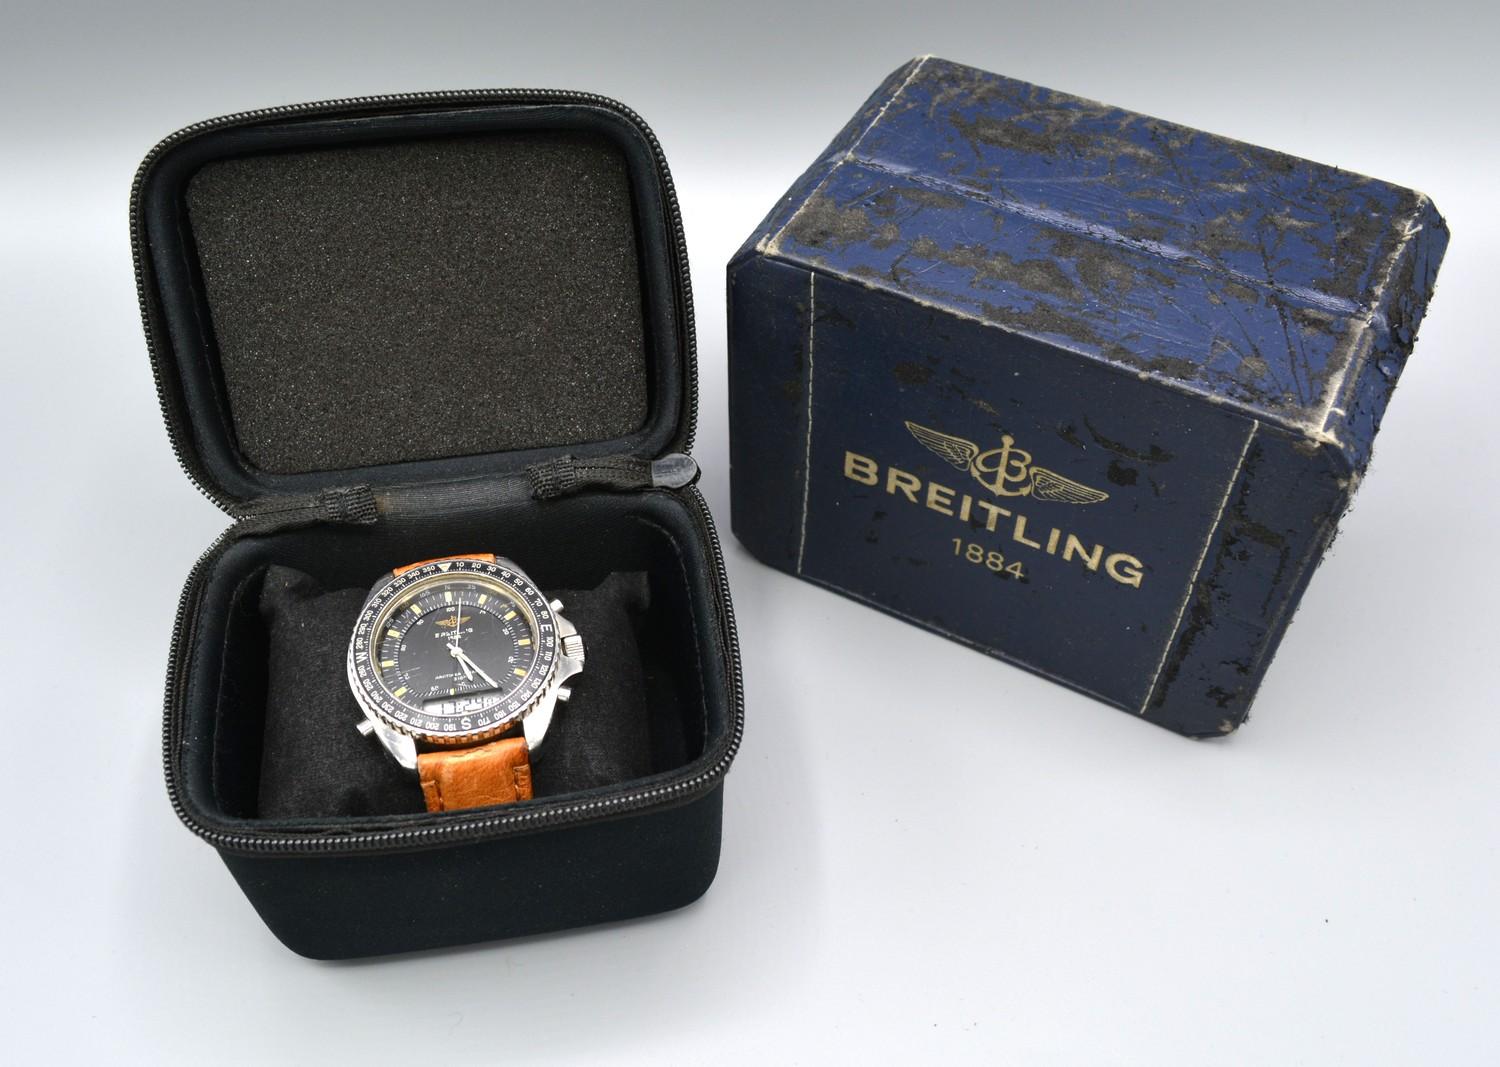 A Breitling Navitimer Pluton 3100 Gentleman's Stainless Steel Wrist Watch with box and soft case